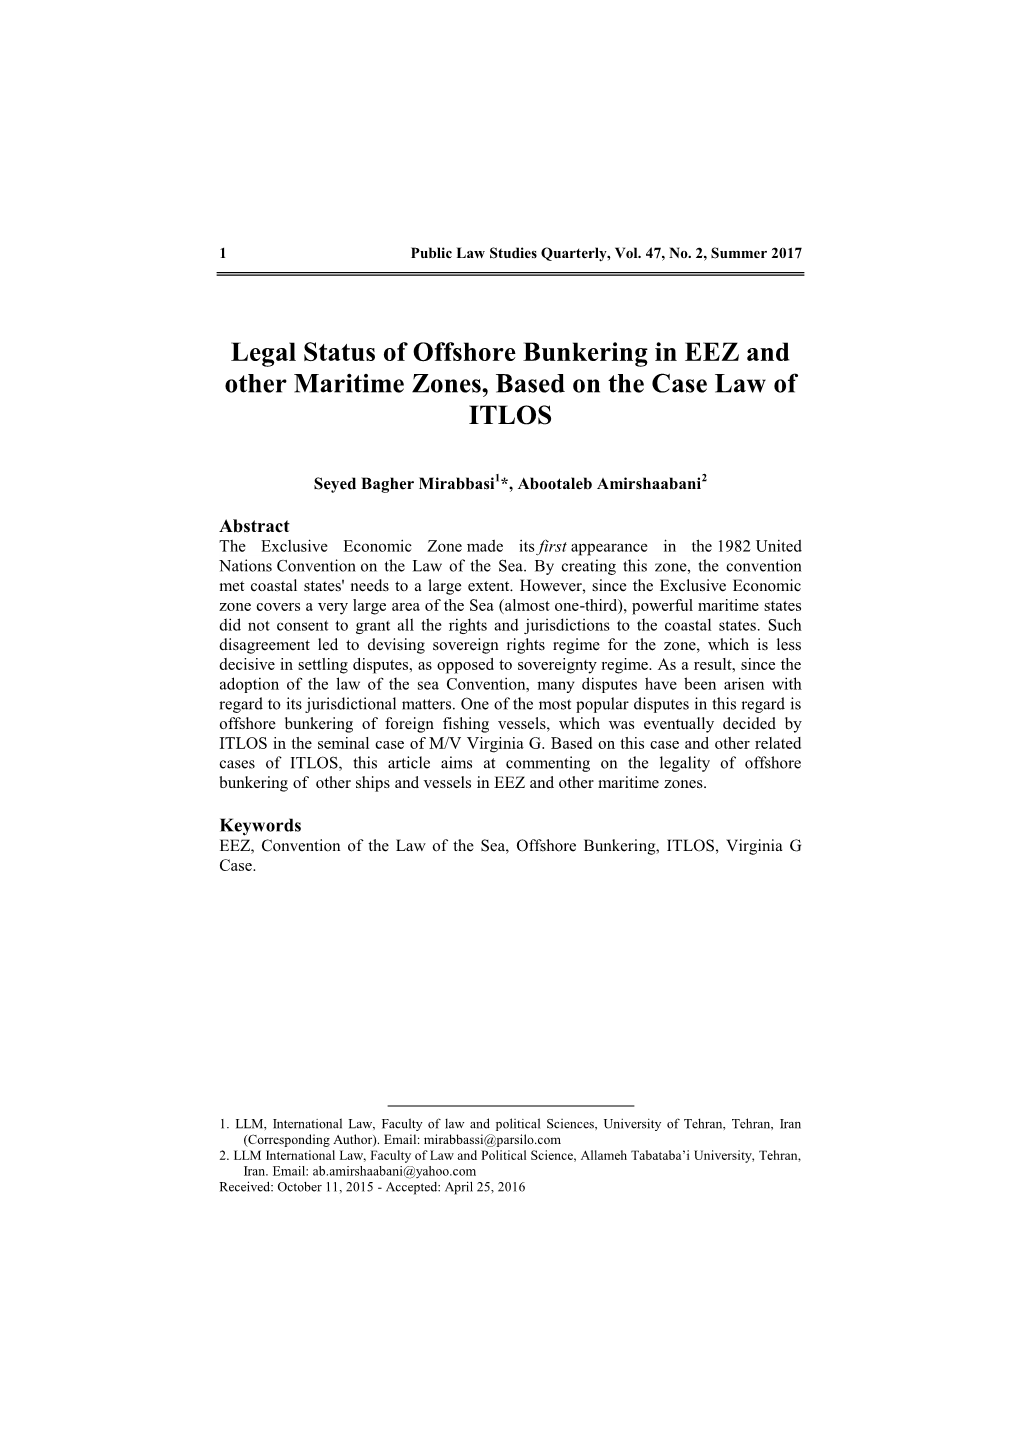 Legal Status of Offshore Bunkering in EEZ and Other Maritime Zones, Based on the Case Law of ITLOS